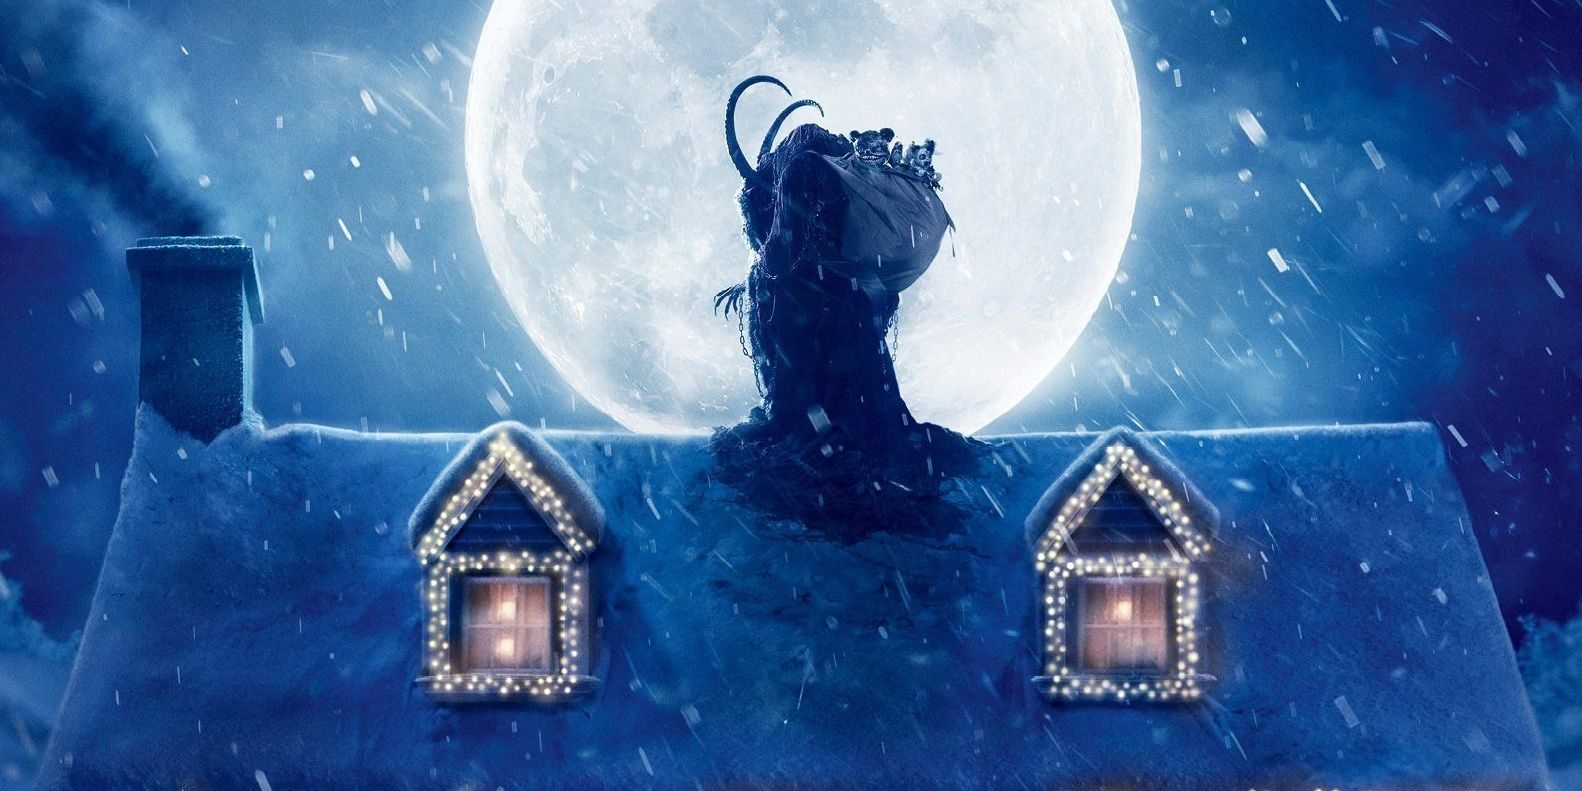 Krampus on the roof of a house.